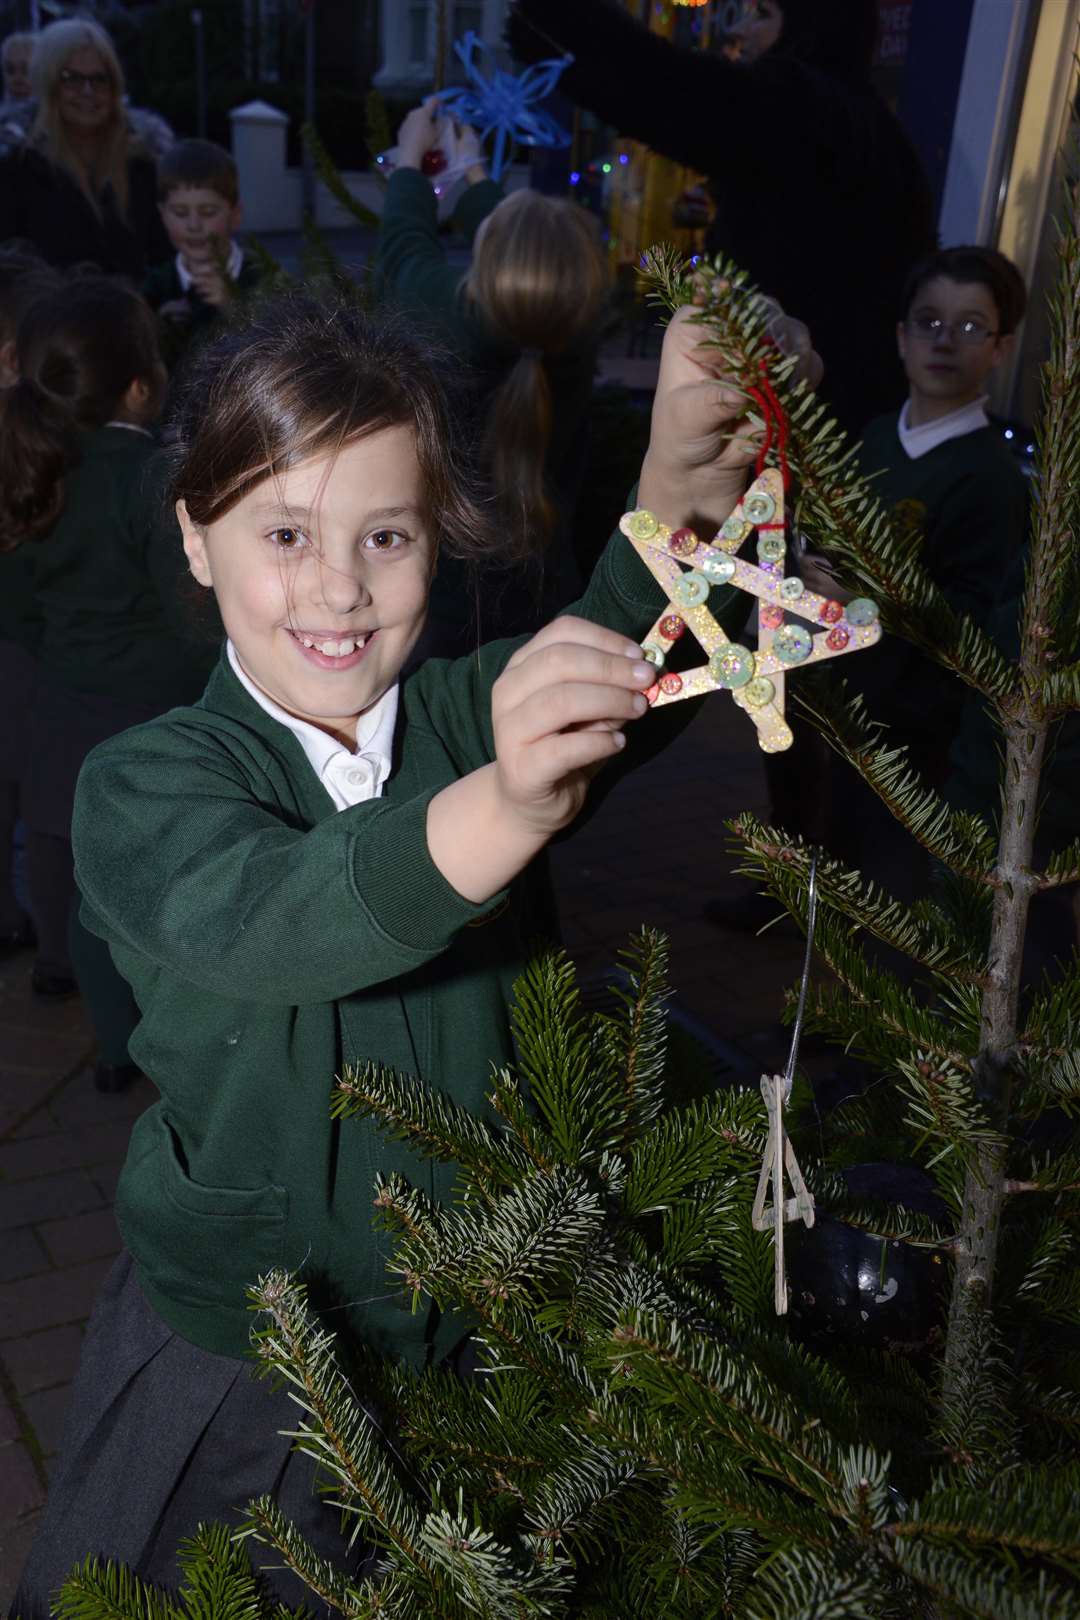 Adding sparkle to the High Street: Zoe Murray (nine) attaches a star to one of the Christmas trees that boutique owner Amanda Goring bought for passers by to admire